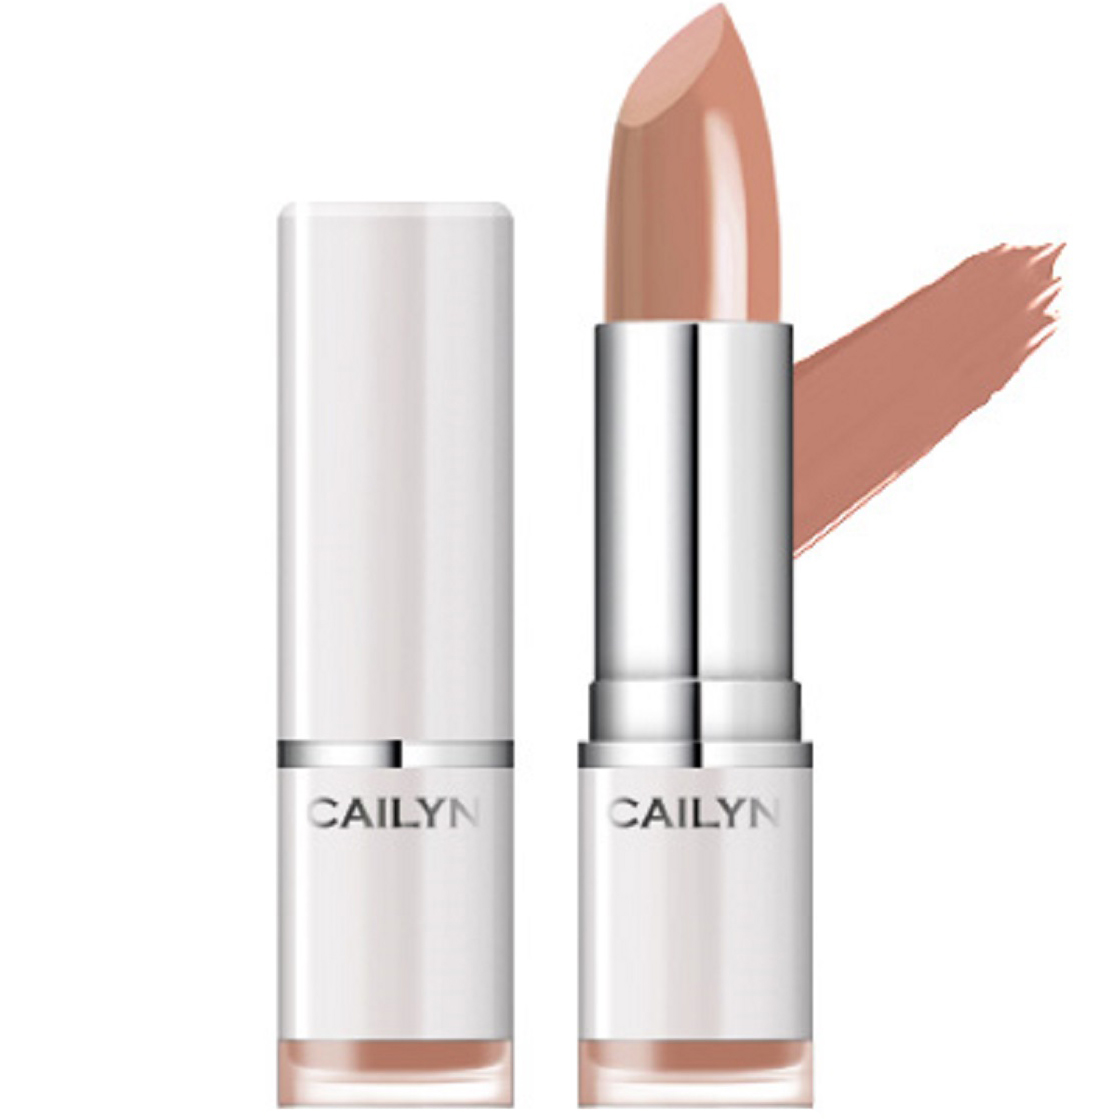 Cailyn Pure Luxe Lipstick 5 g Cailyn Cosmetics Läppstift